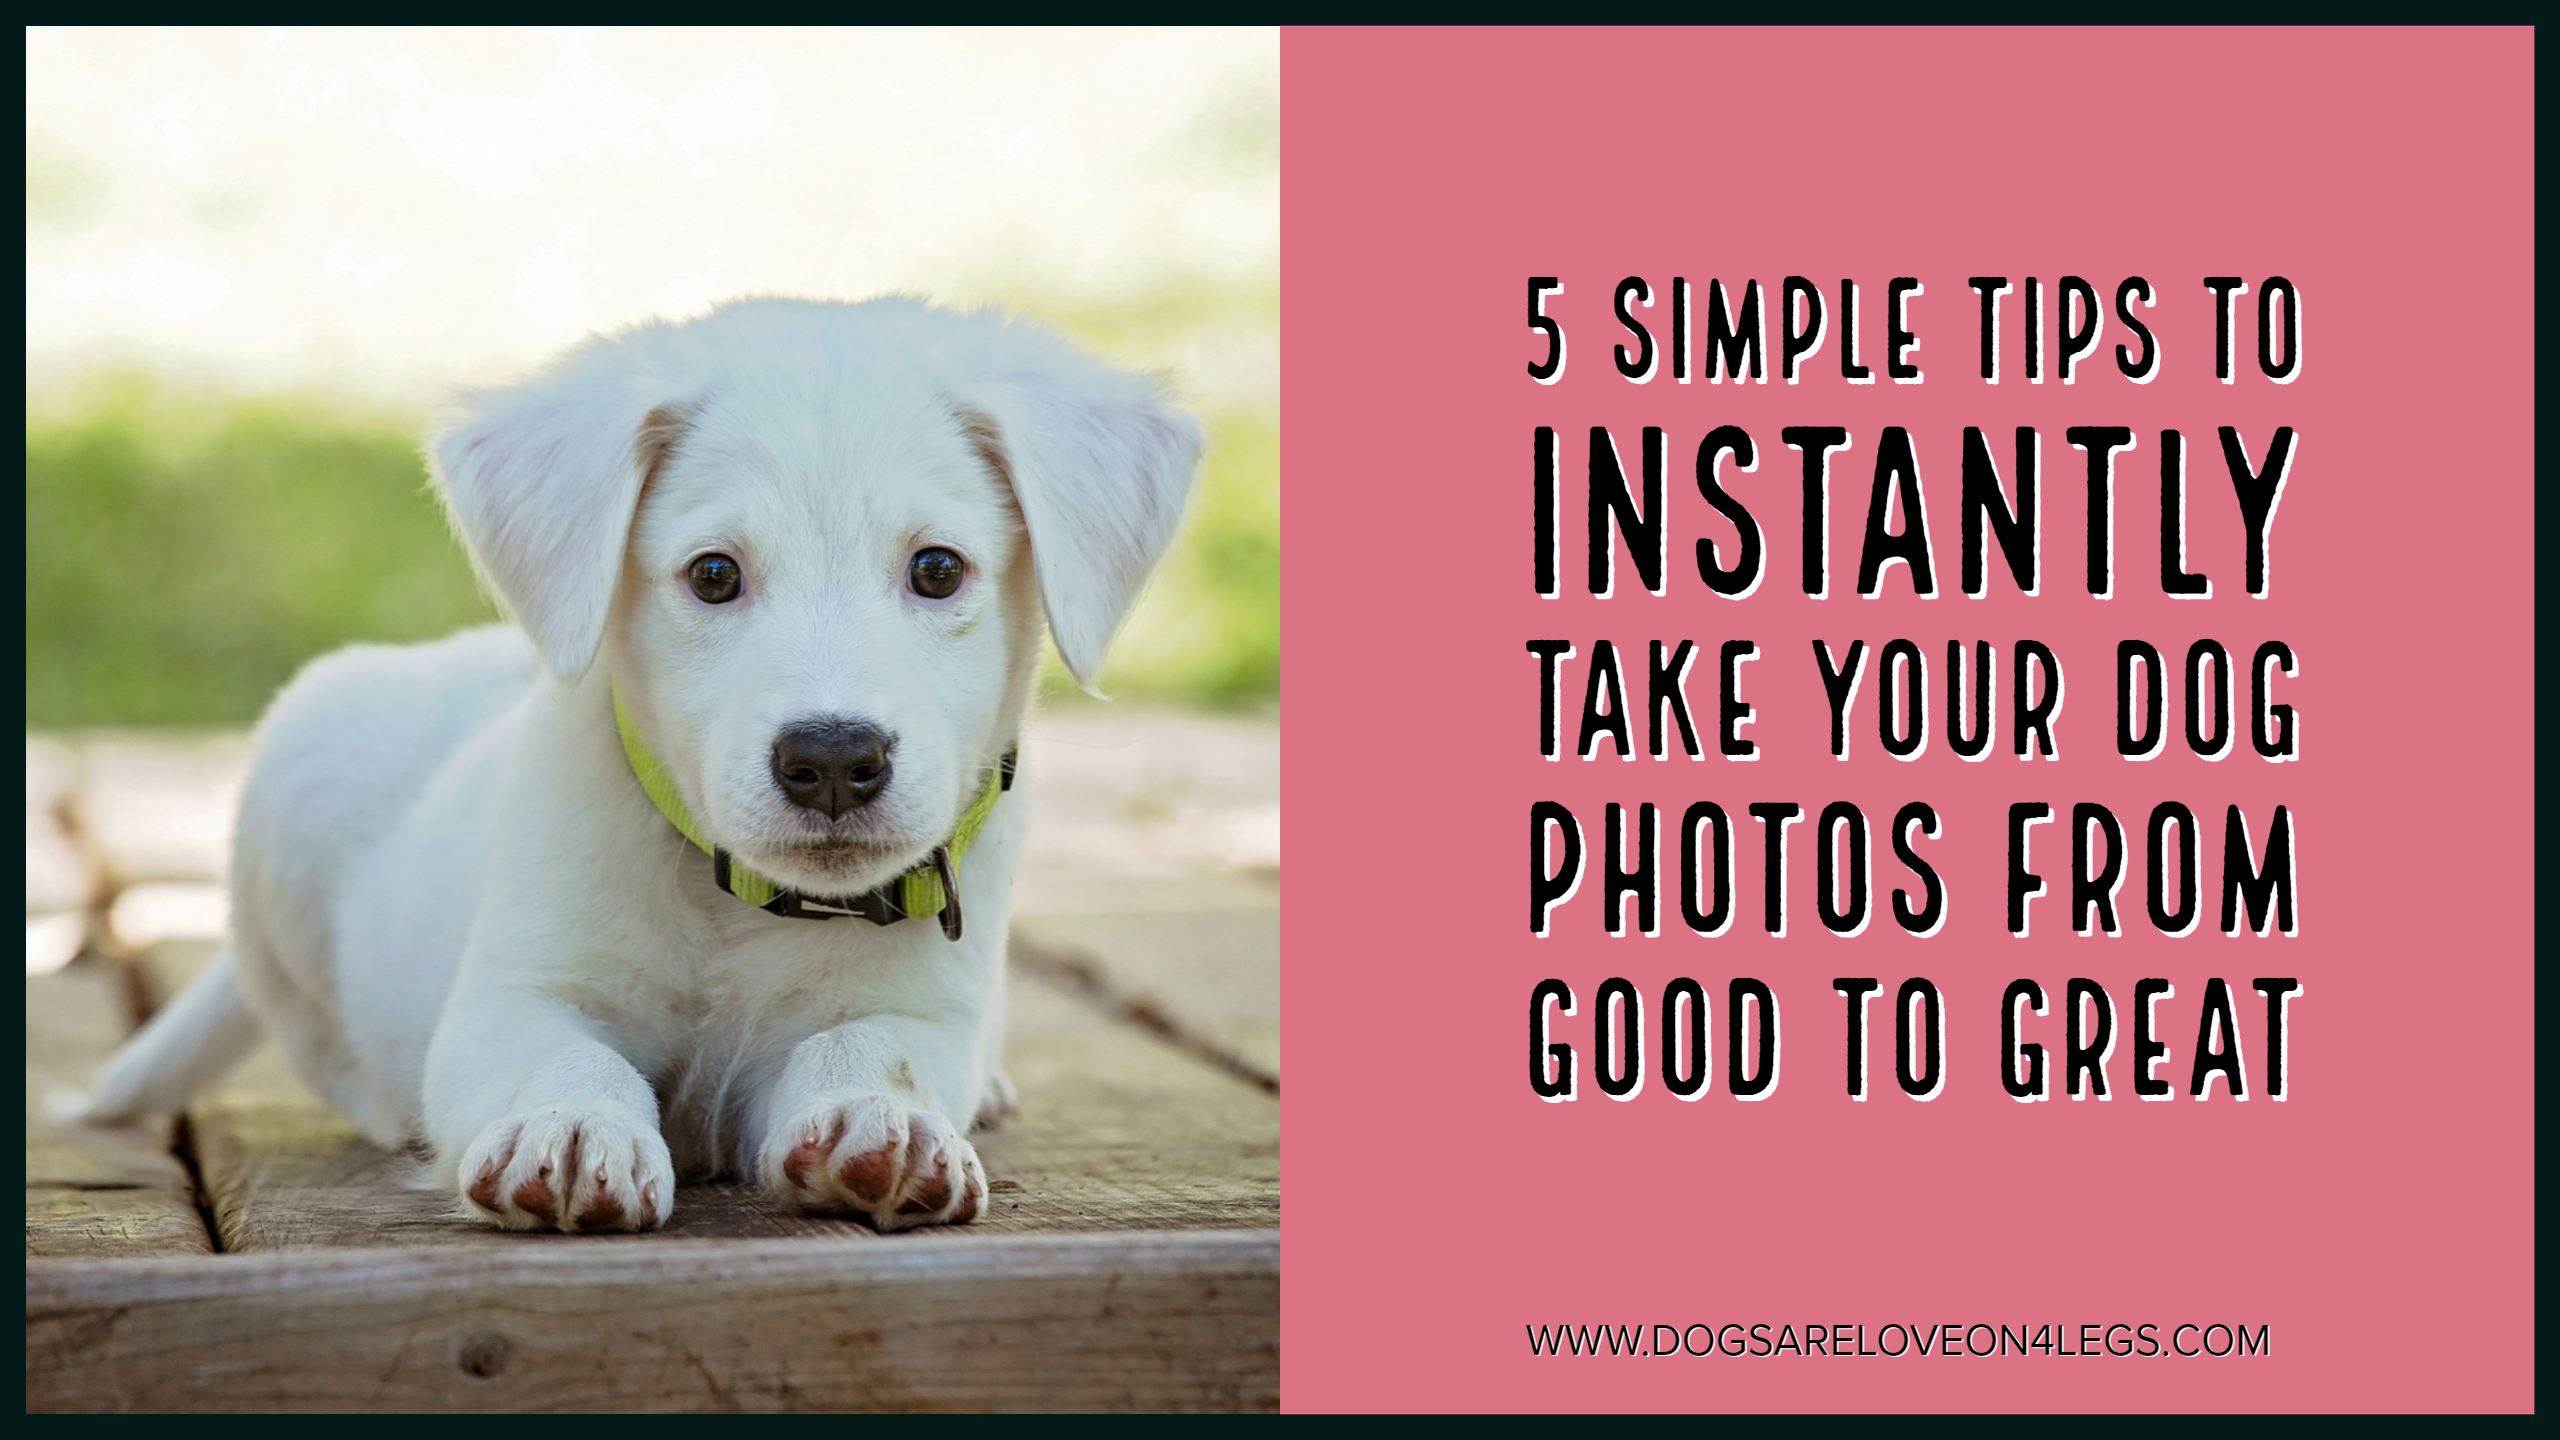 5 Simple Tips To Instantly Take Your Dog Photos From Good To Great